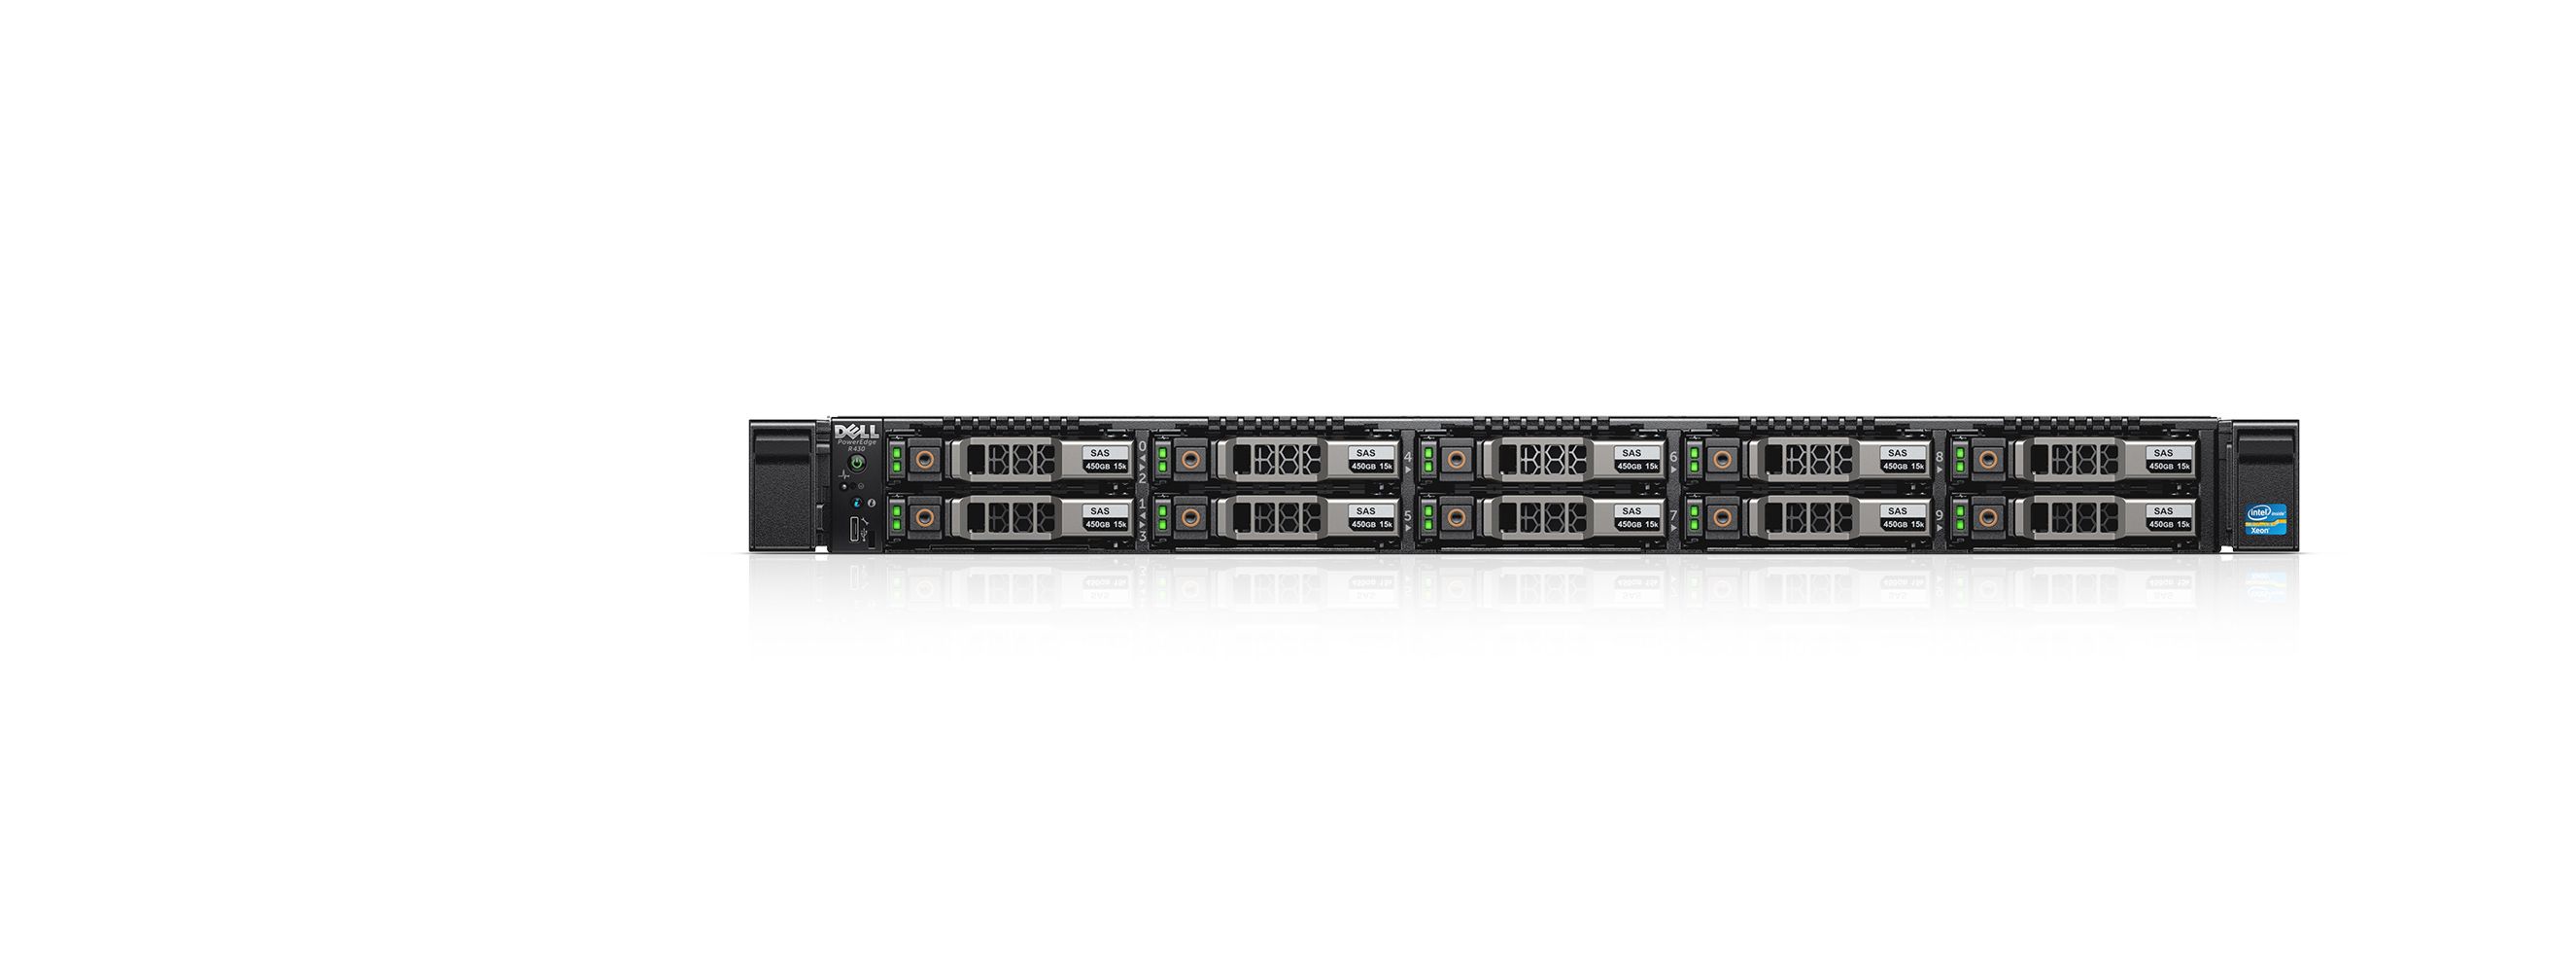 Dell PowerEdge R430 Server Chassis 2.5